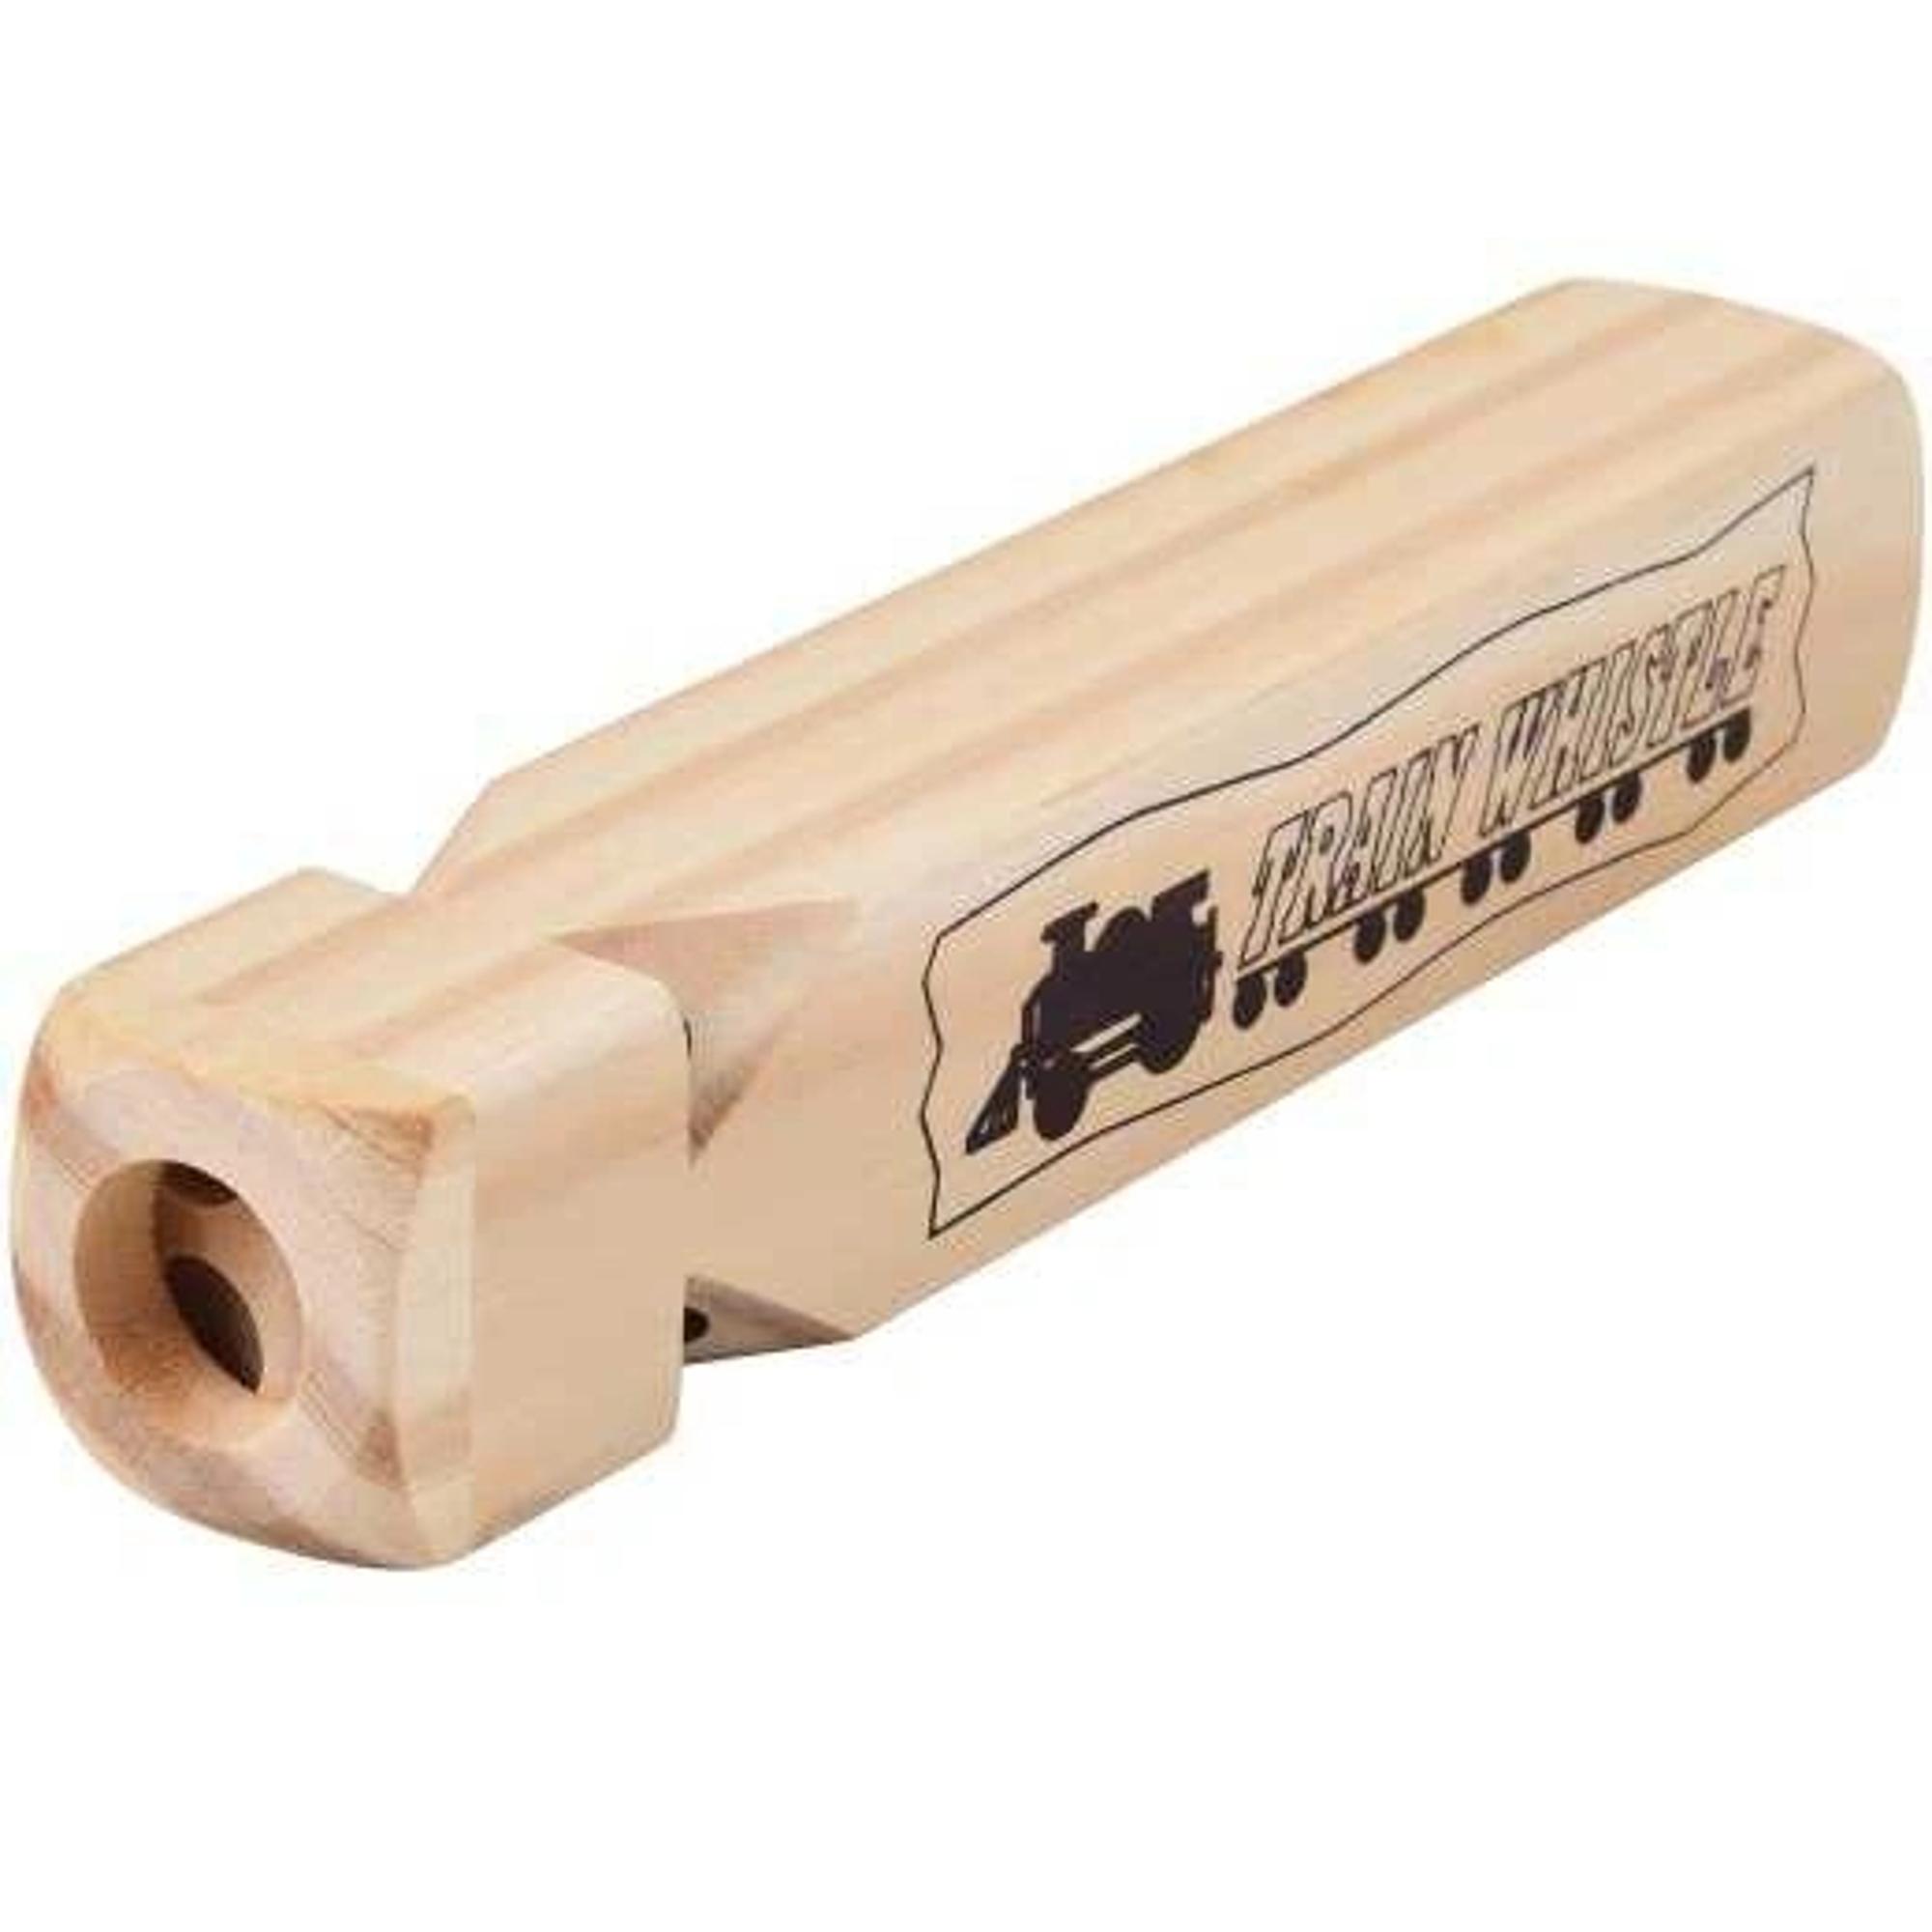 Train Whistle - Wooden